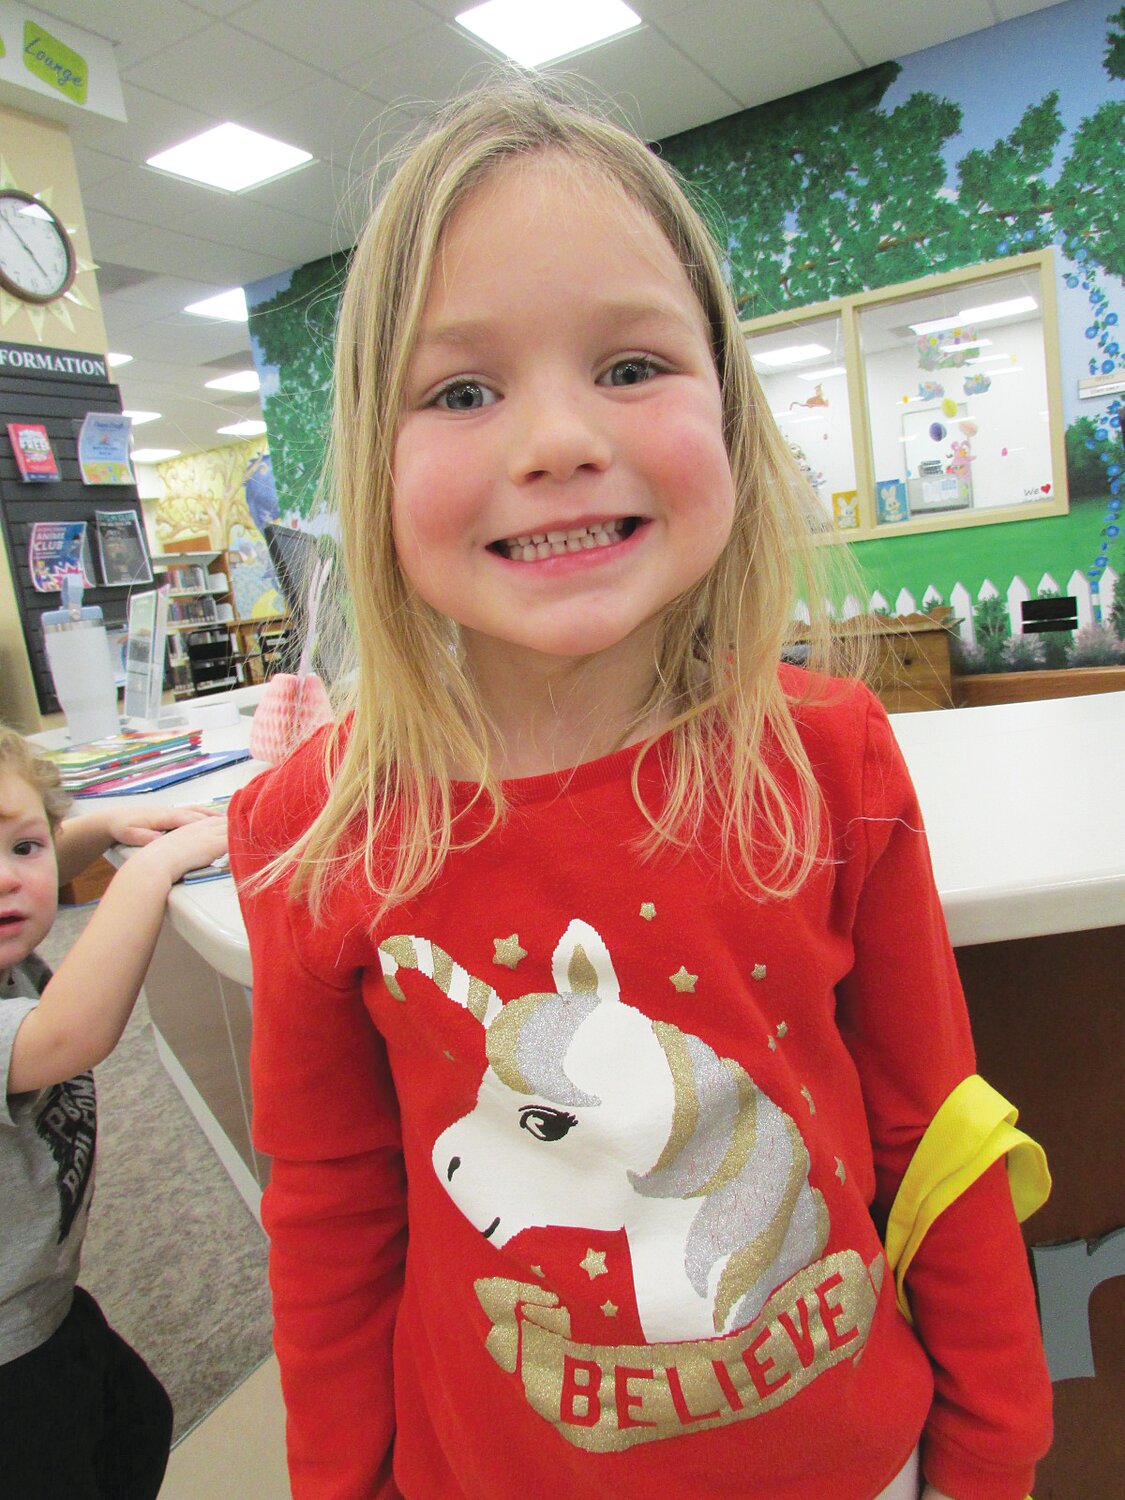 Julia Nichols, 5, has completed the Crawfordsville District Public Library program 1,000 Books Before Kindergarten, for the fifth time. Julia, along with her parents Tyler and Mindy Nichols has read 5,000 books. Julia's favorite book is "Pete the Cat and the Bedtime Blues" by Kimberly and James Dean. Mom said, "The library has been a wonderful place to meet and play with friends over the years. We appreciate the support from the reading program to encourage a love for reading."